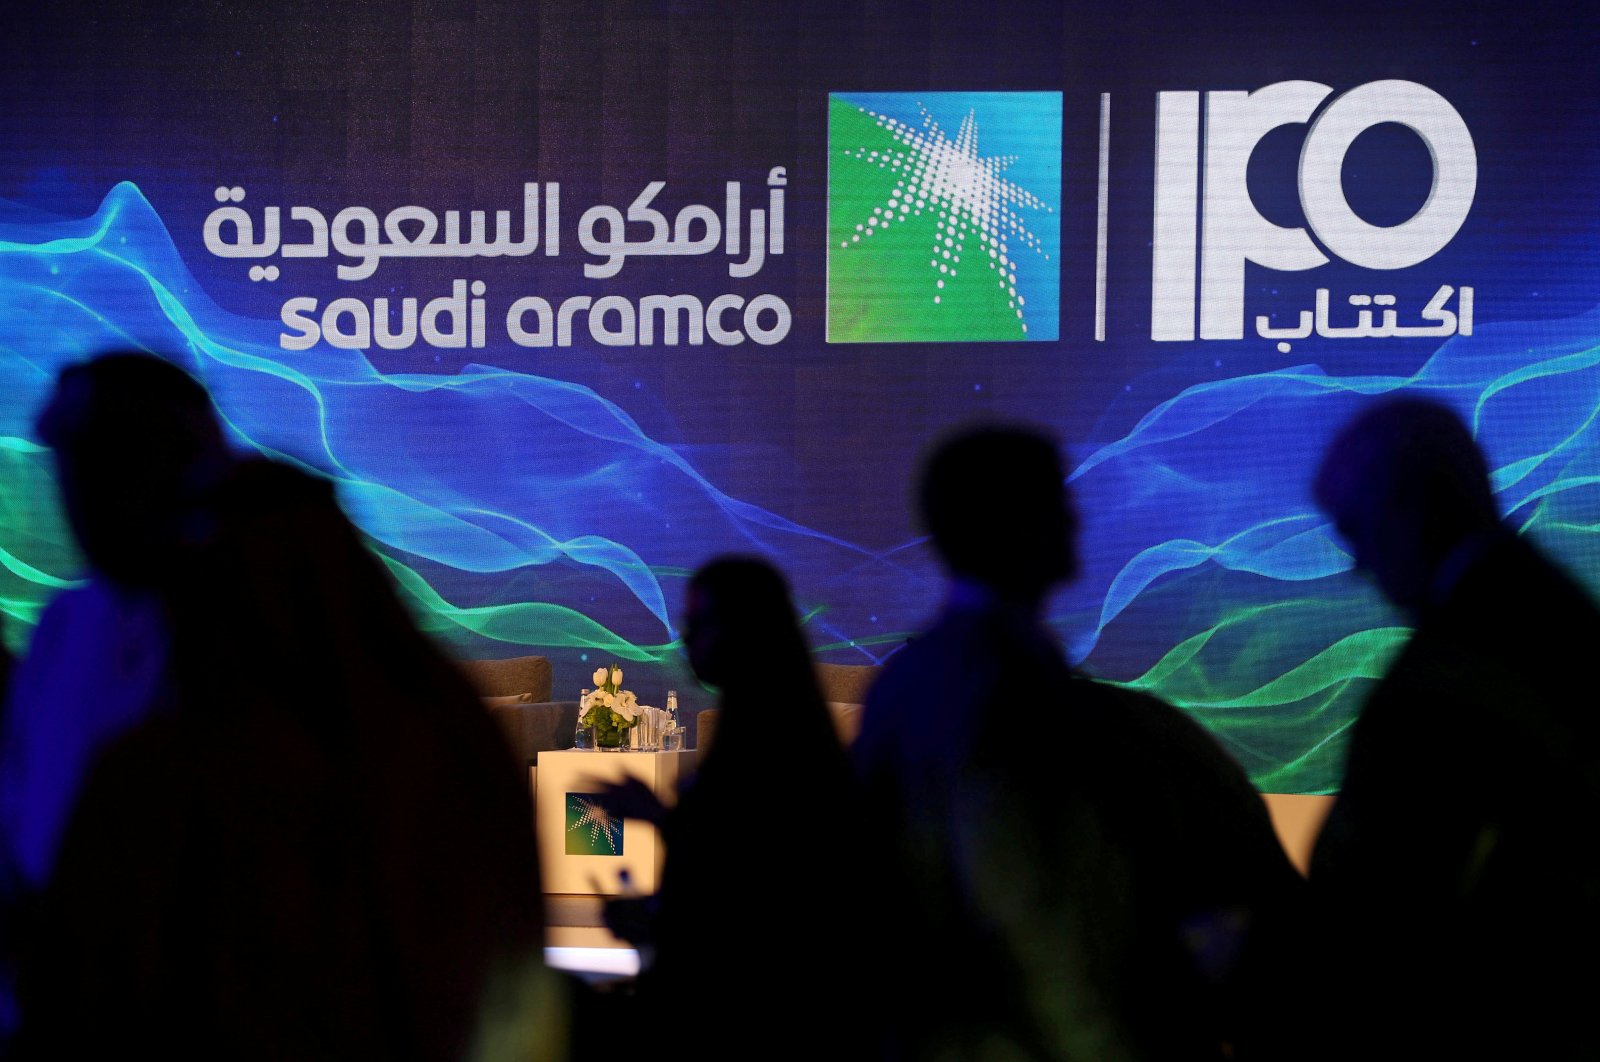 A sign of Saudi Aramco's initial public offering (IPO) is seen during a news conference by the state oil company at the Plaza Conference Center in Dhahran, Saudi Arabia, Nov. 3, 2019. (Reuters Photo)